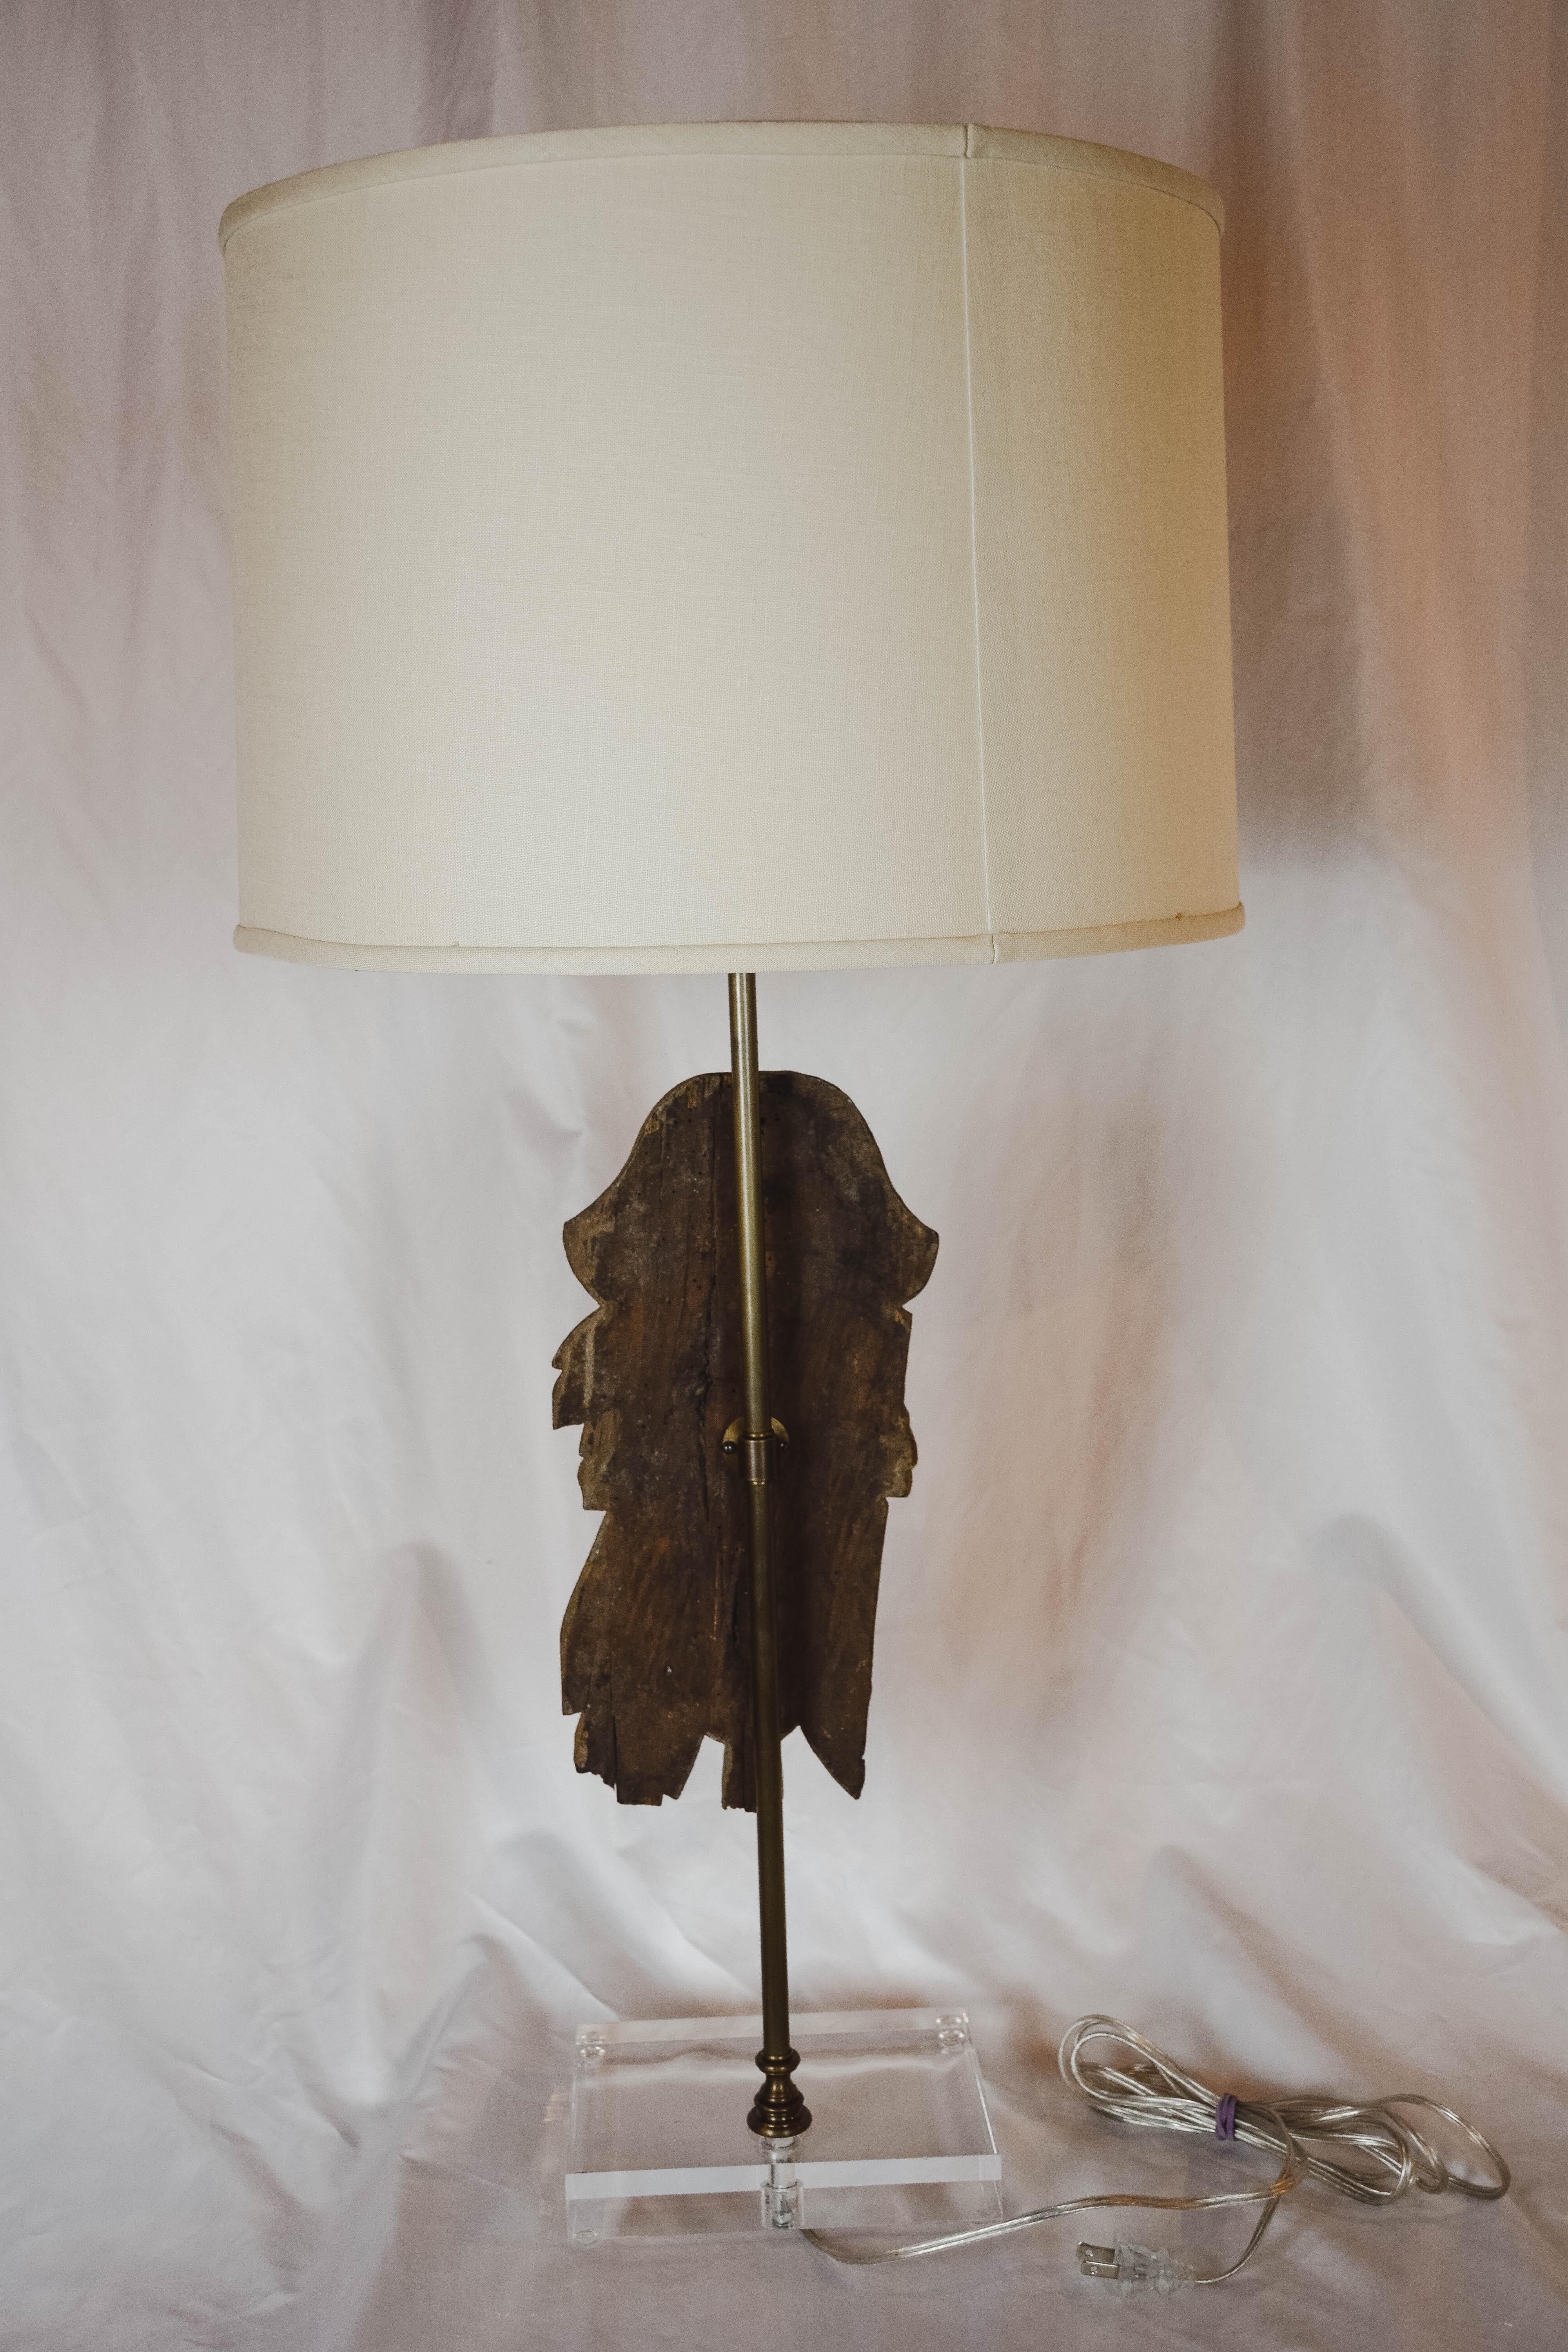 18th Century and Earlier Lamp Designed with Antique Portuguese Architectural Element